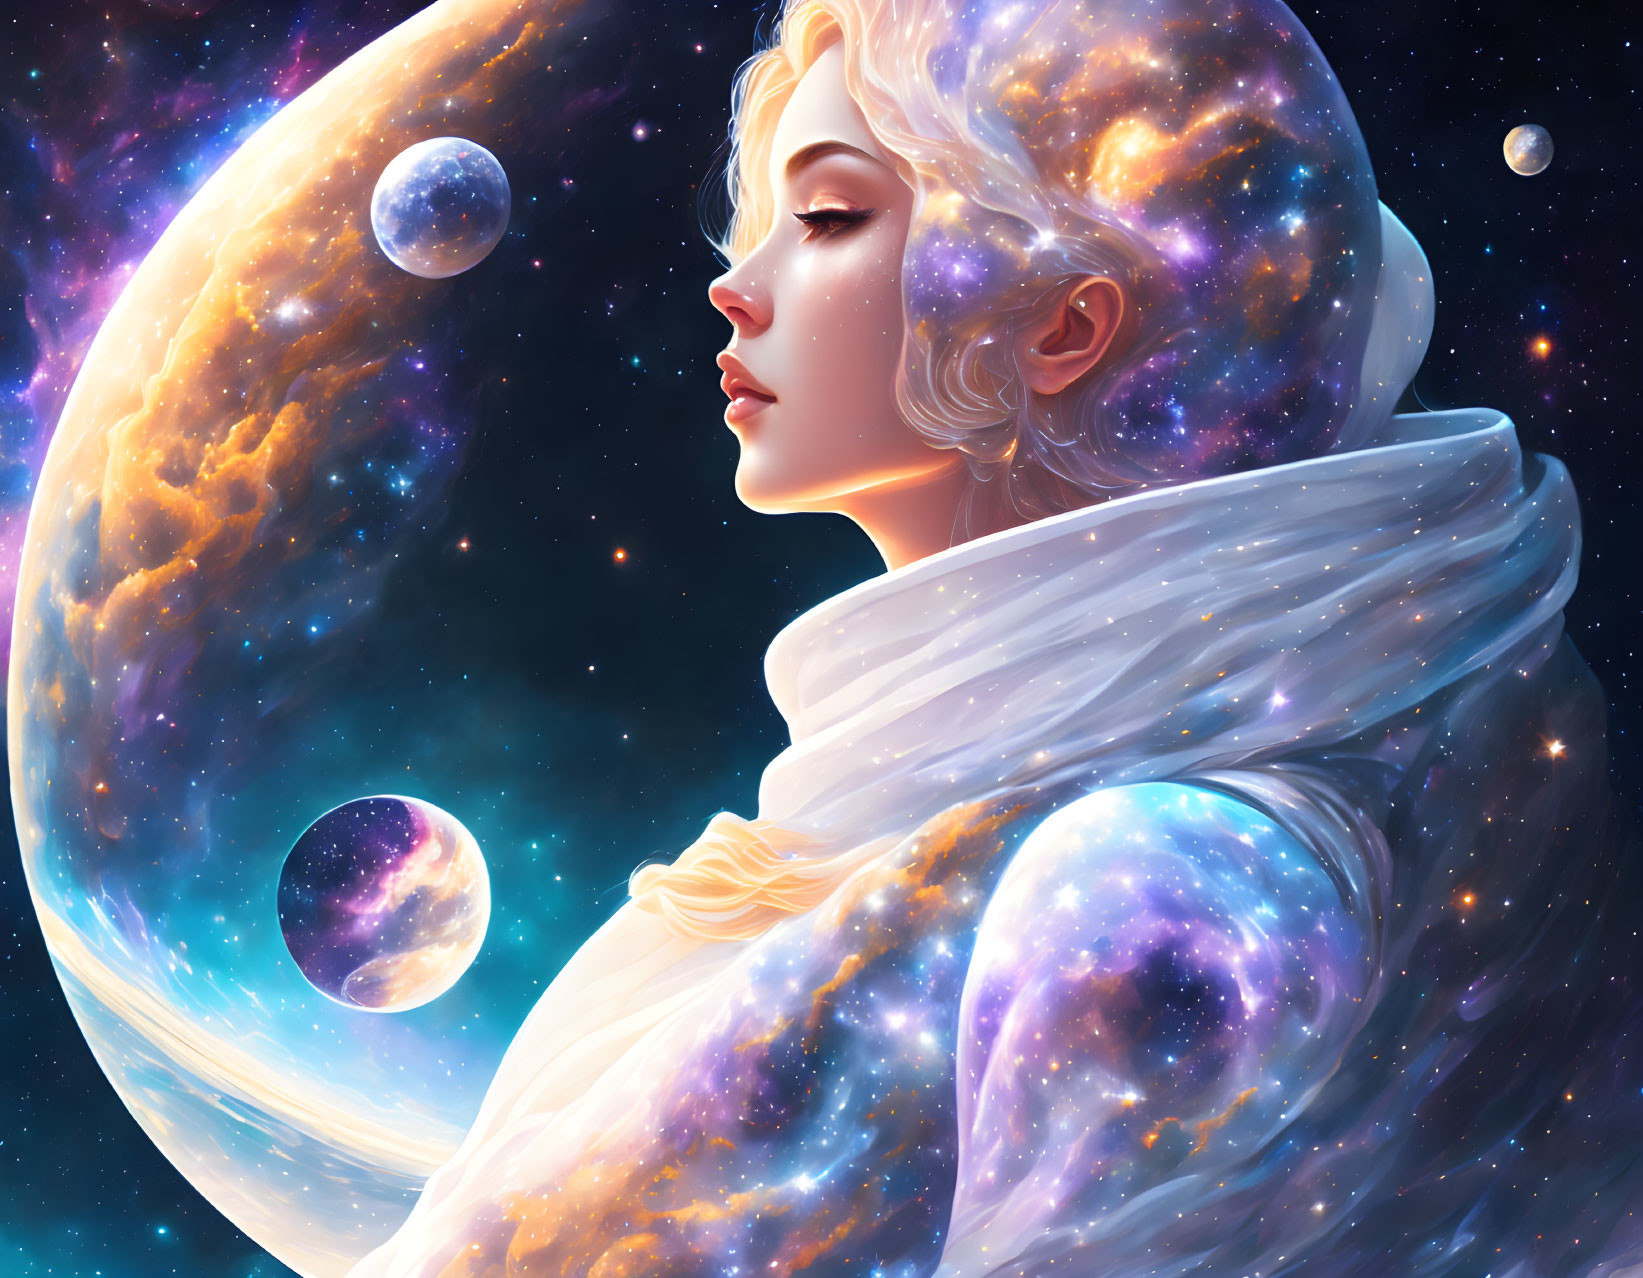 Cosmic-themed portrait of a serene woman in celestial scarf against vibrant space backdrop